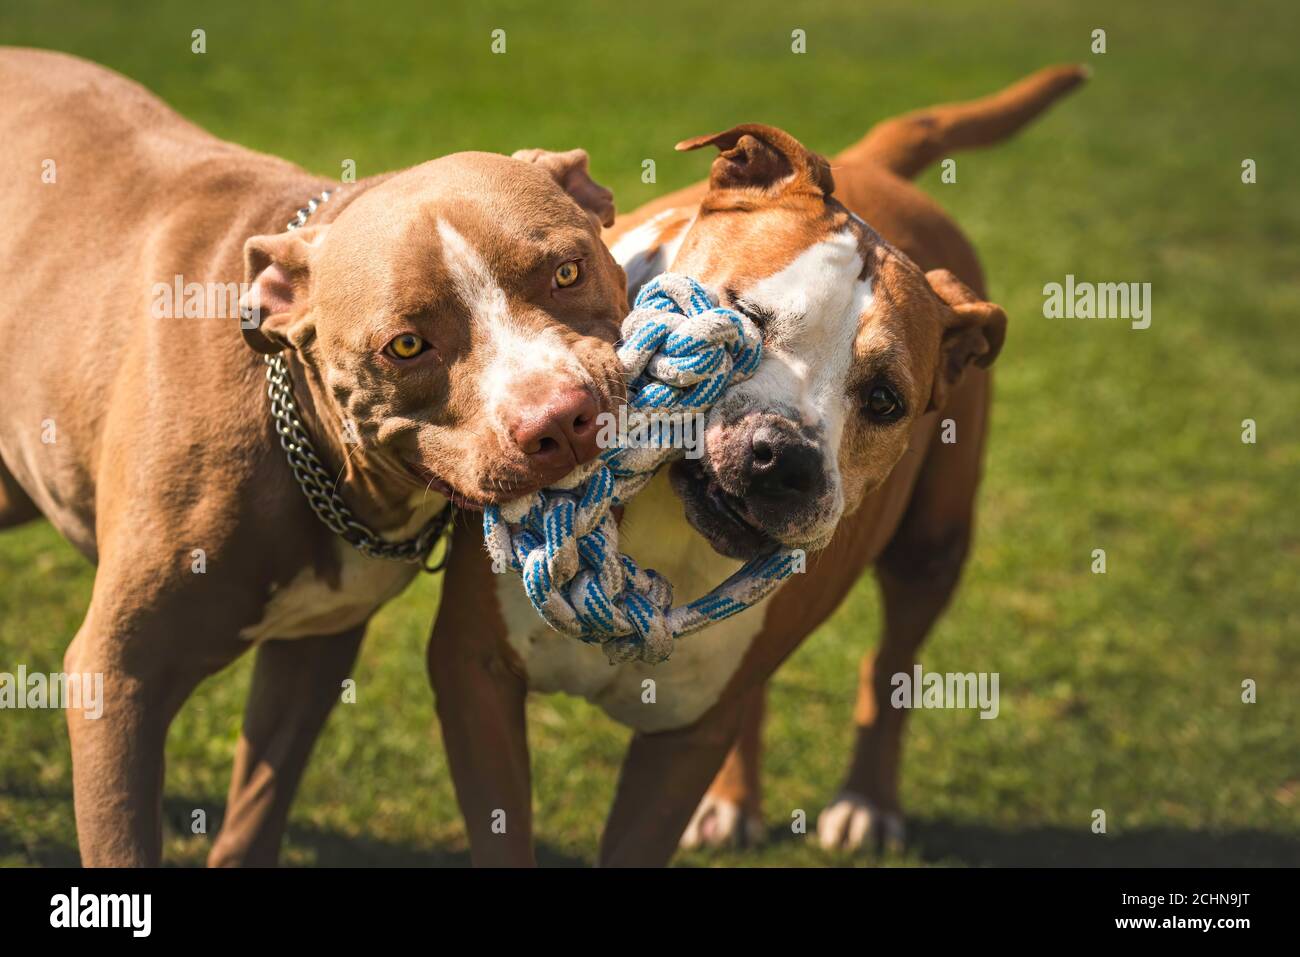 Two dogs amstaff terrier playing tog of war outside. Young and old dog fun in backyard. Stock Photo